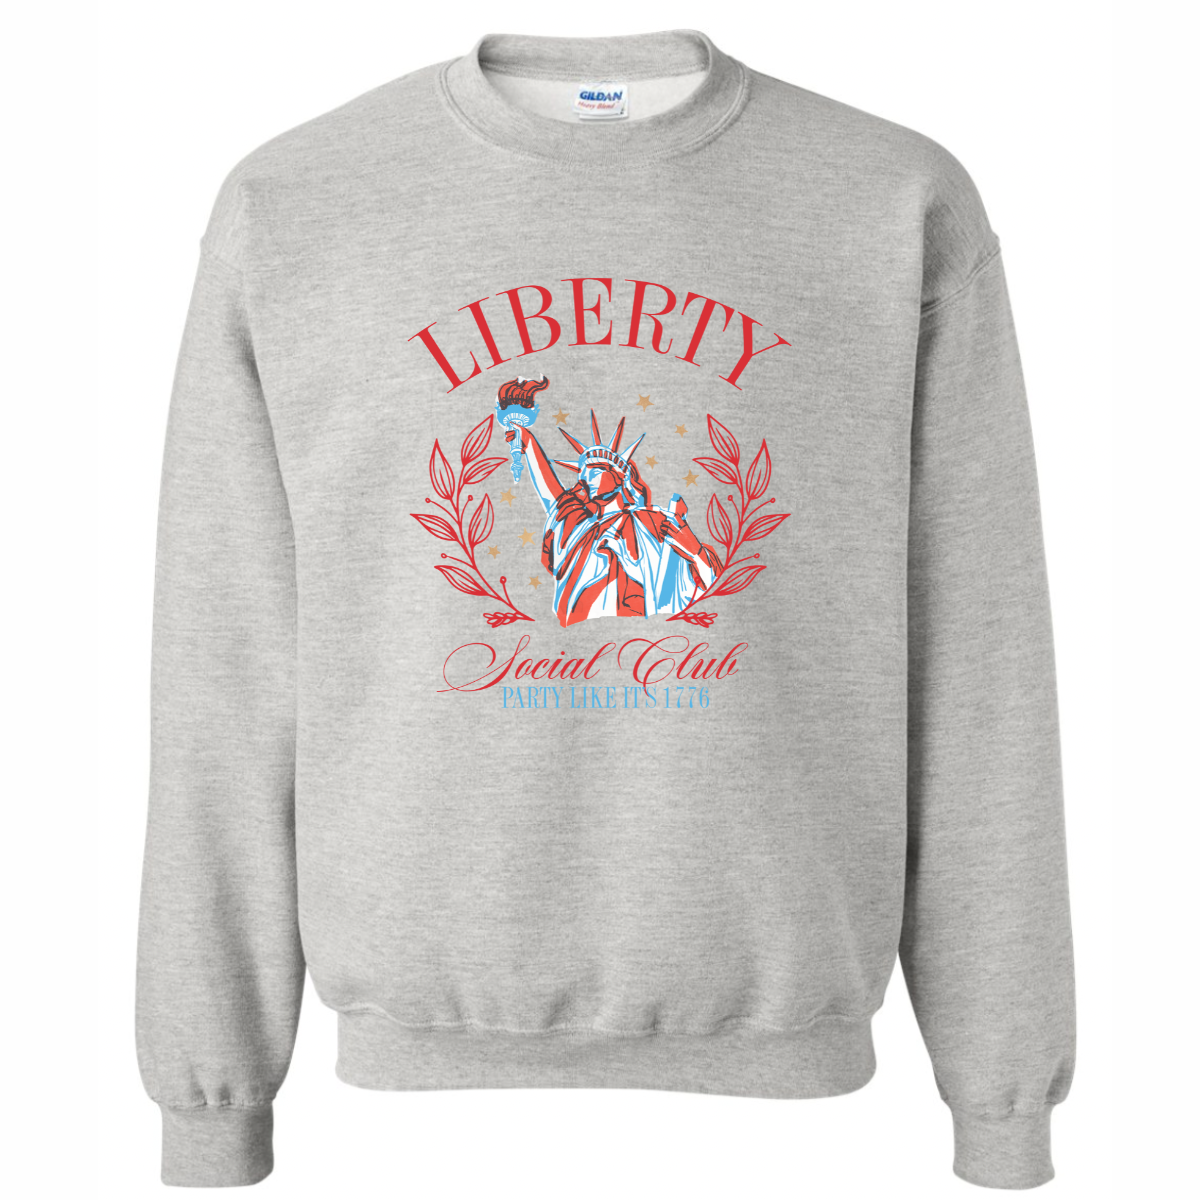 Liberty Social Club, Party Like It's 1766 - July 4th Printed Apparel